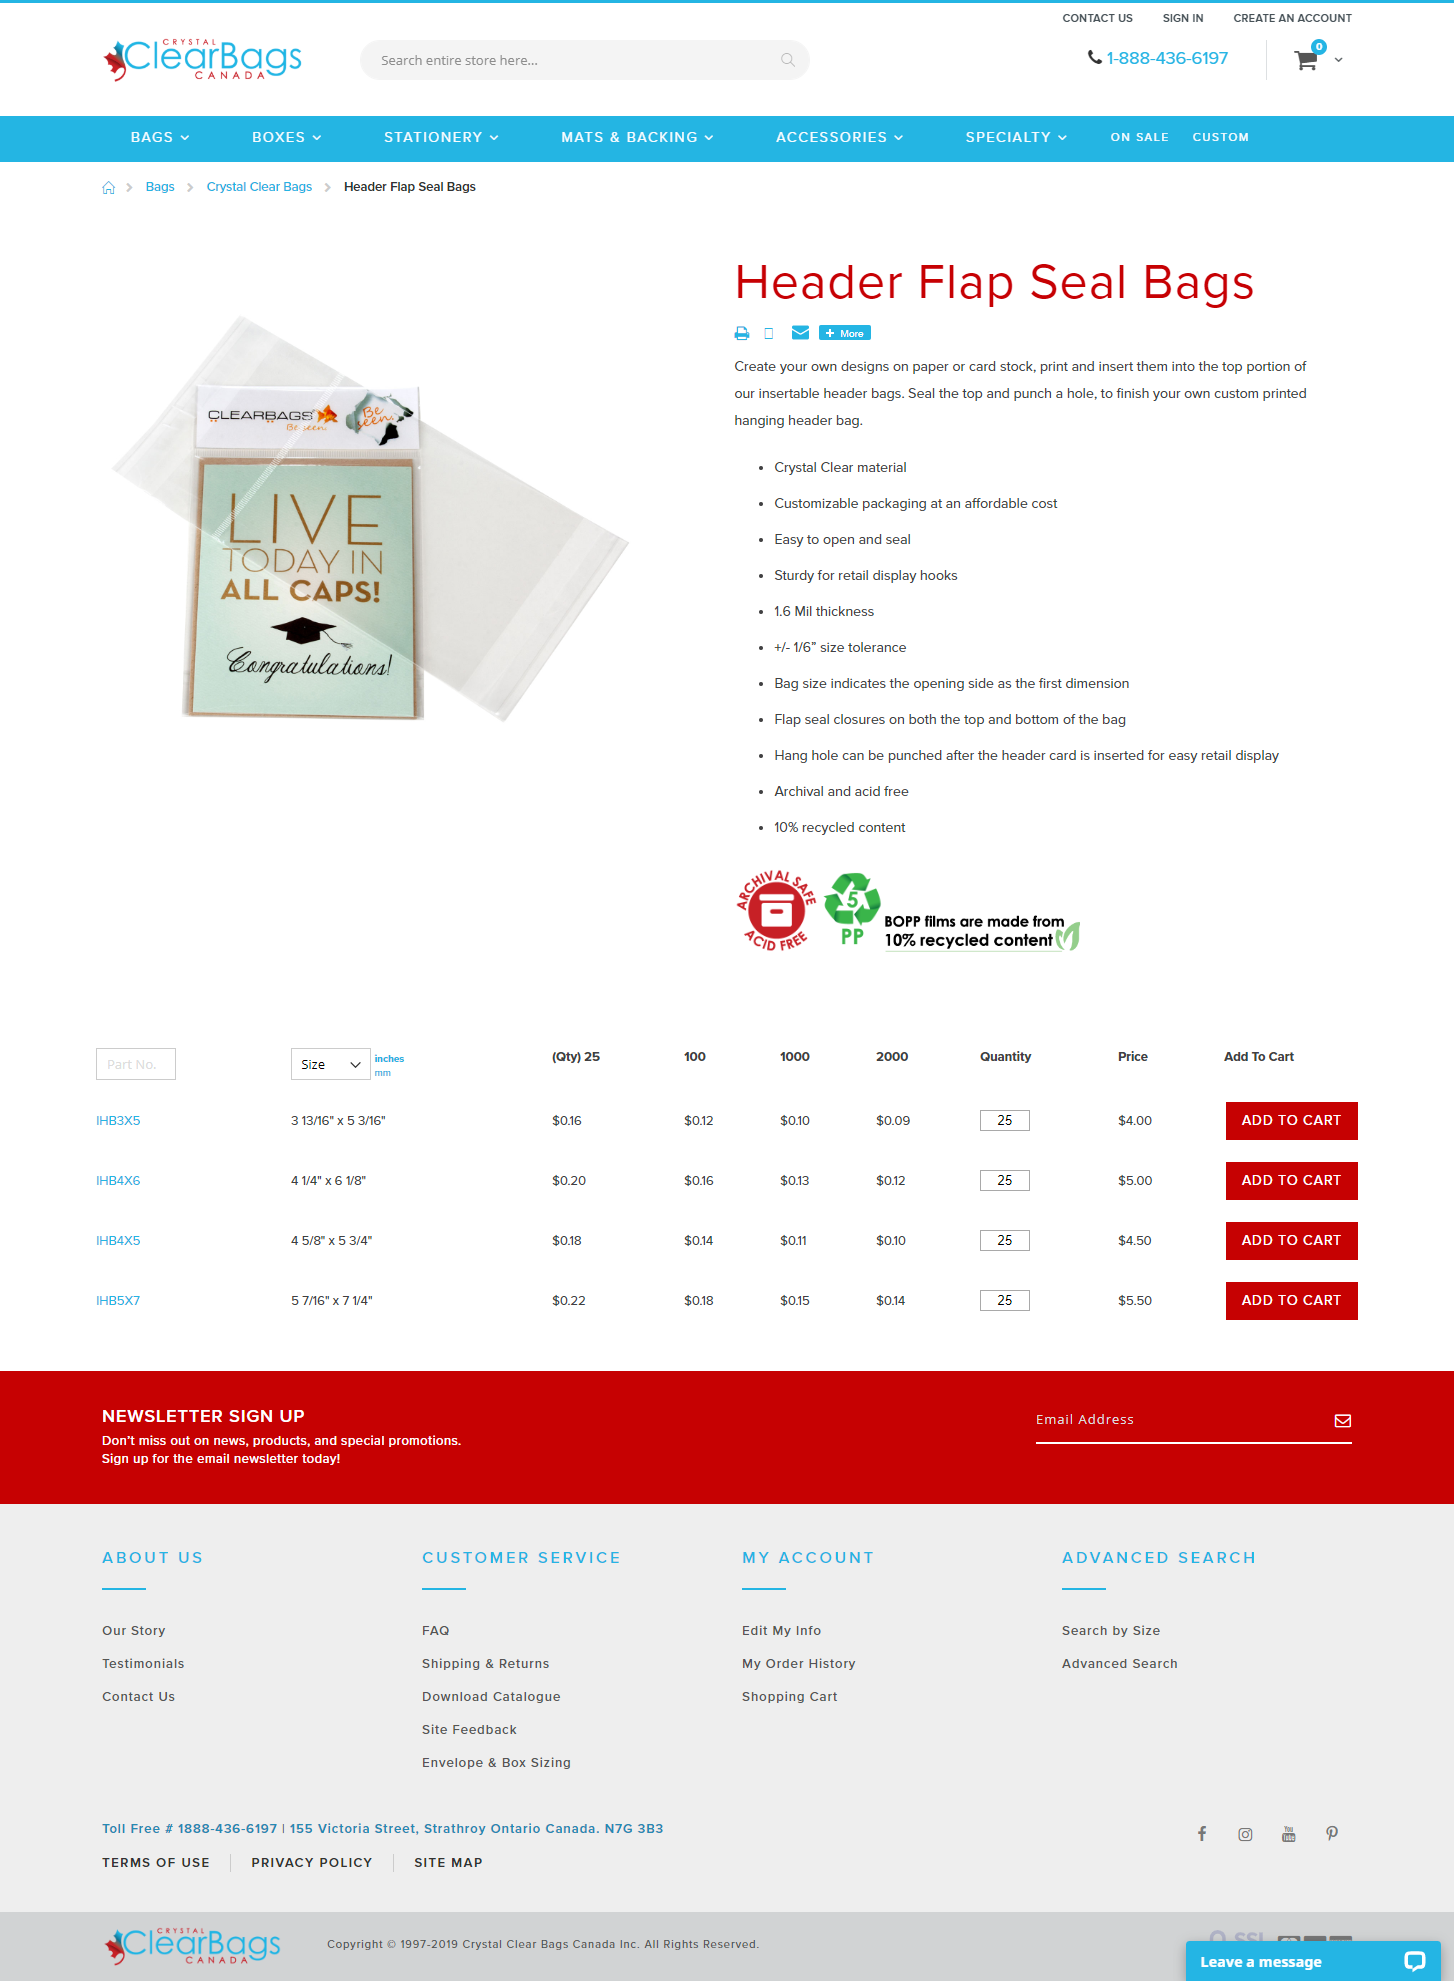 Crystal Clear Bags product page